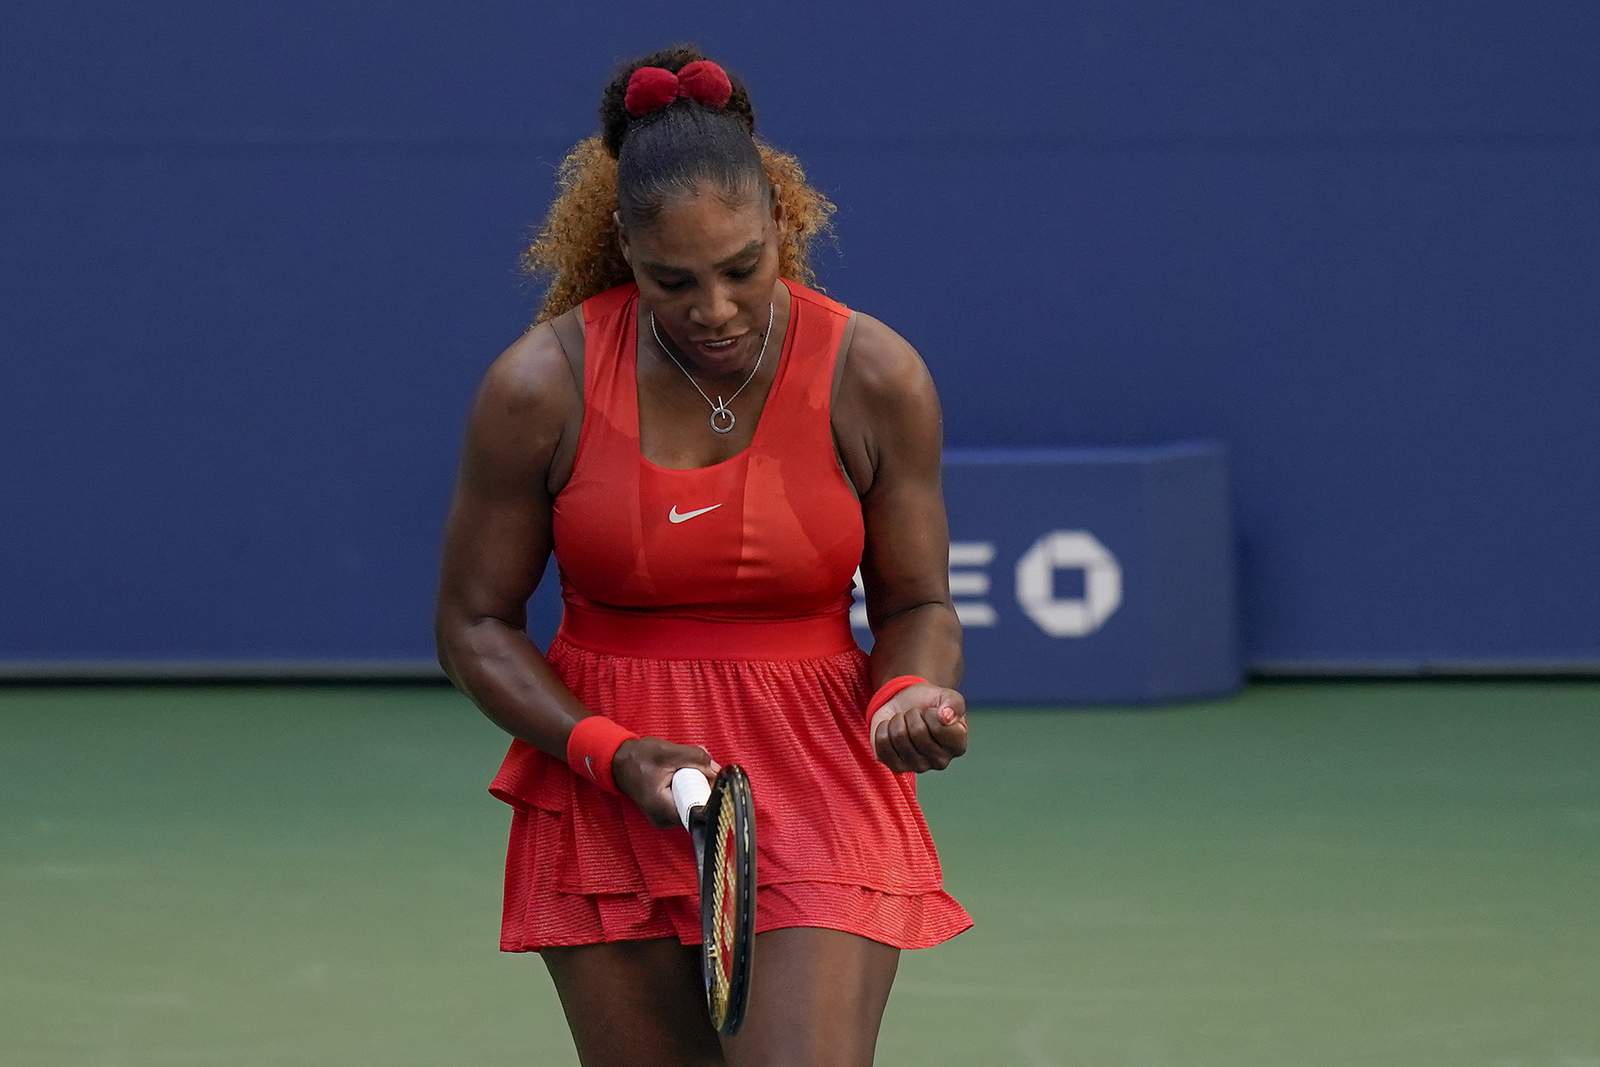 Williams takes 10 of 12 games to beat Stephens at US Open